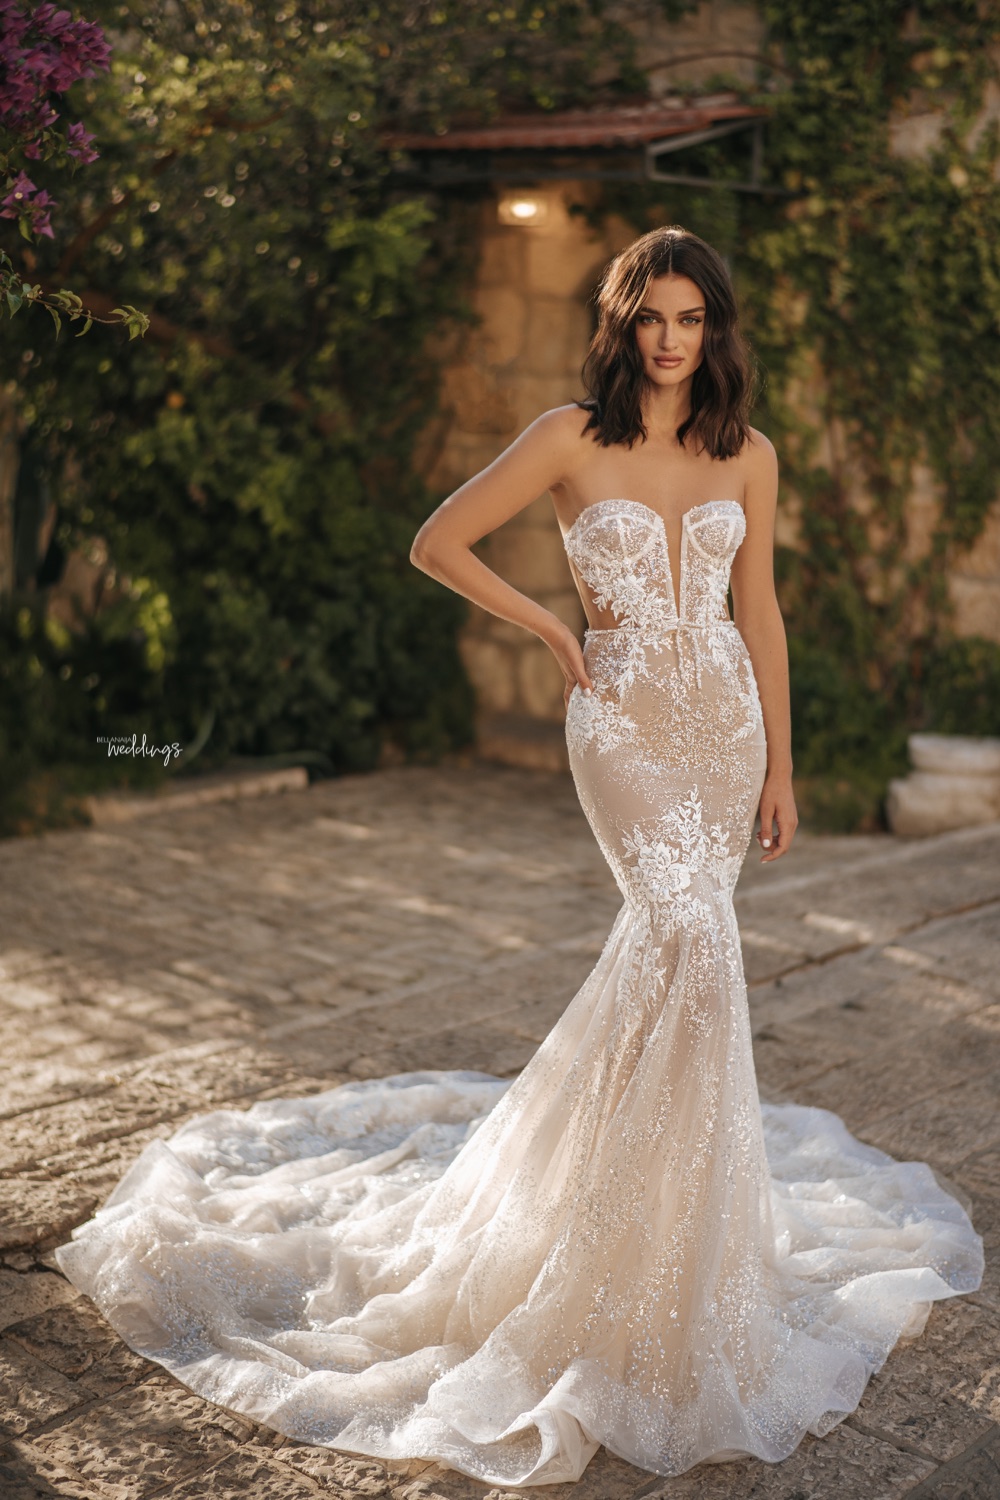 BN Bridal: You Def Want to Check Out The Montefiore Bridal Collection ...